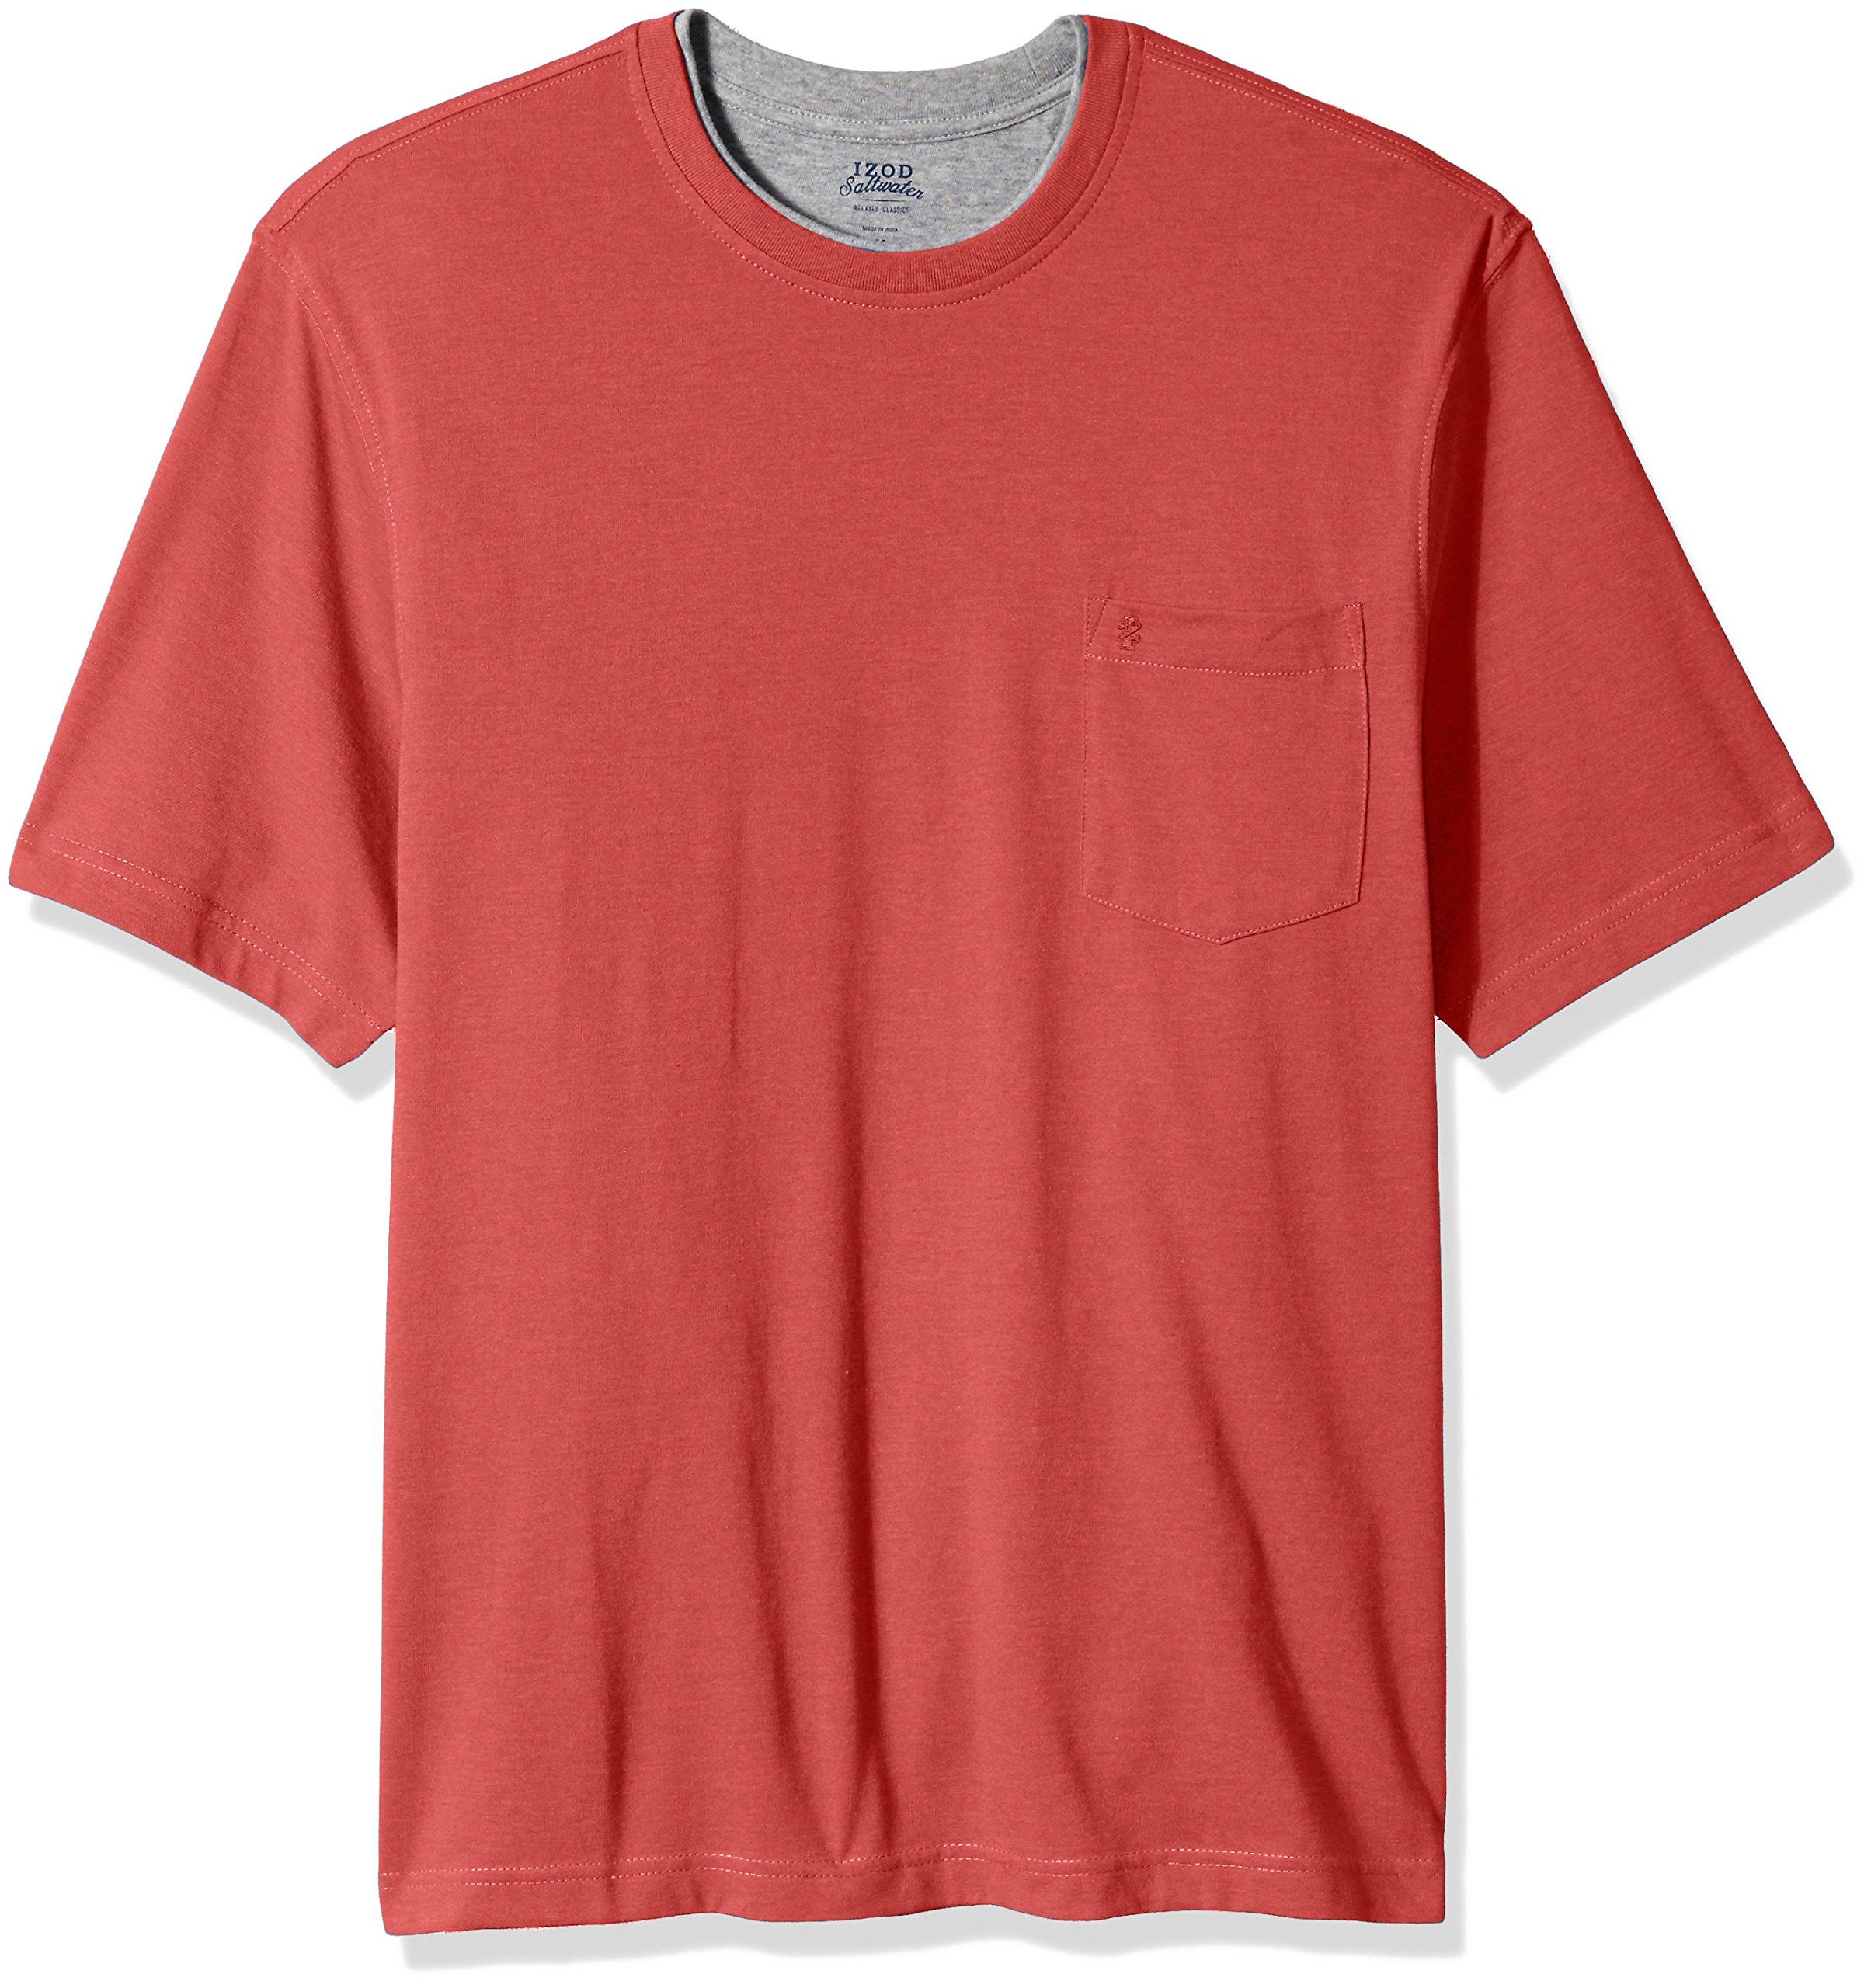 Izod Solid Double Jersey Chatham Point Crew Tee in Red for Men